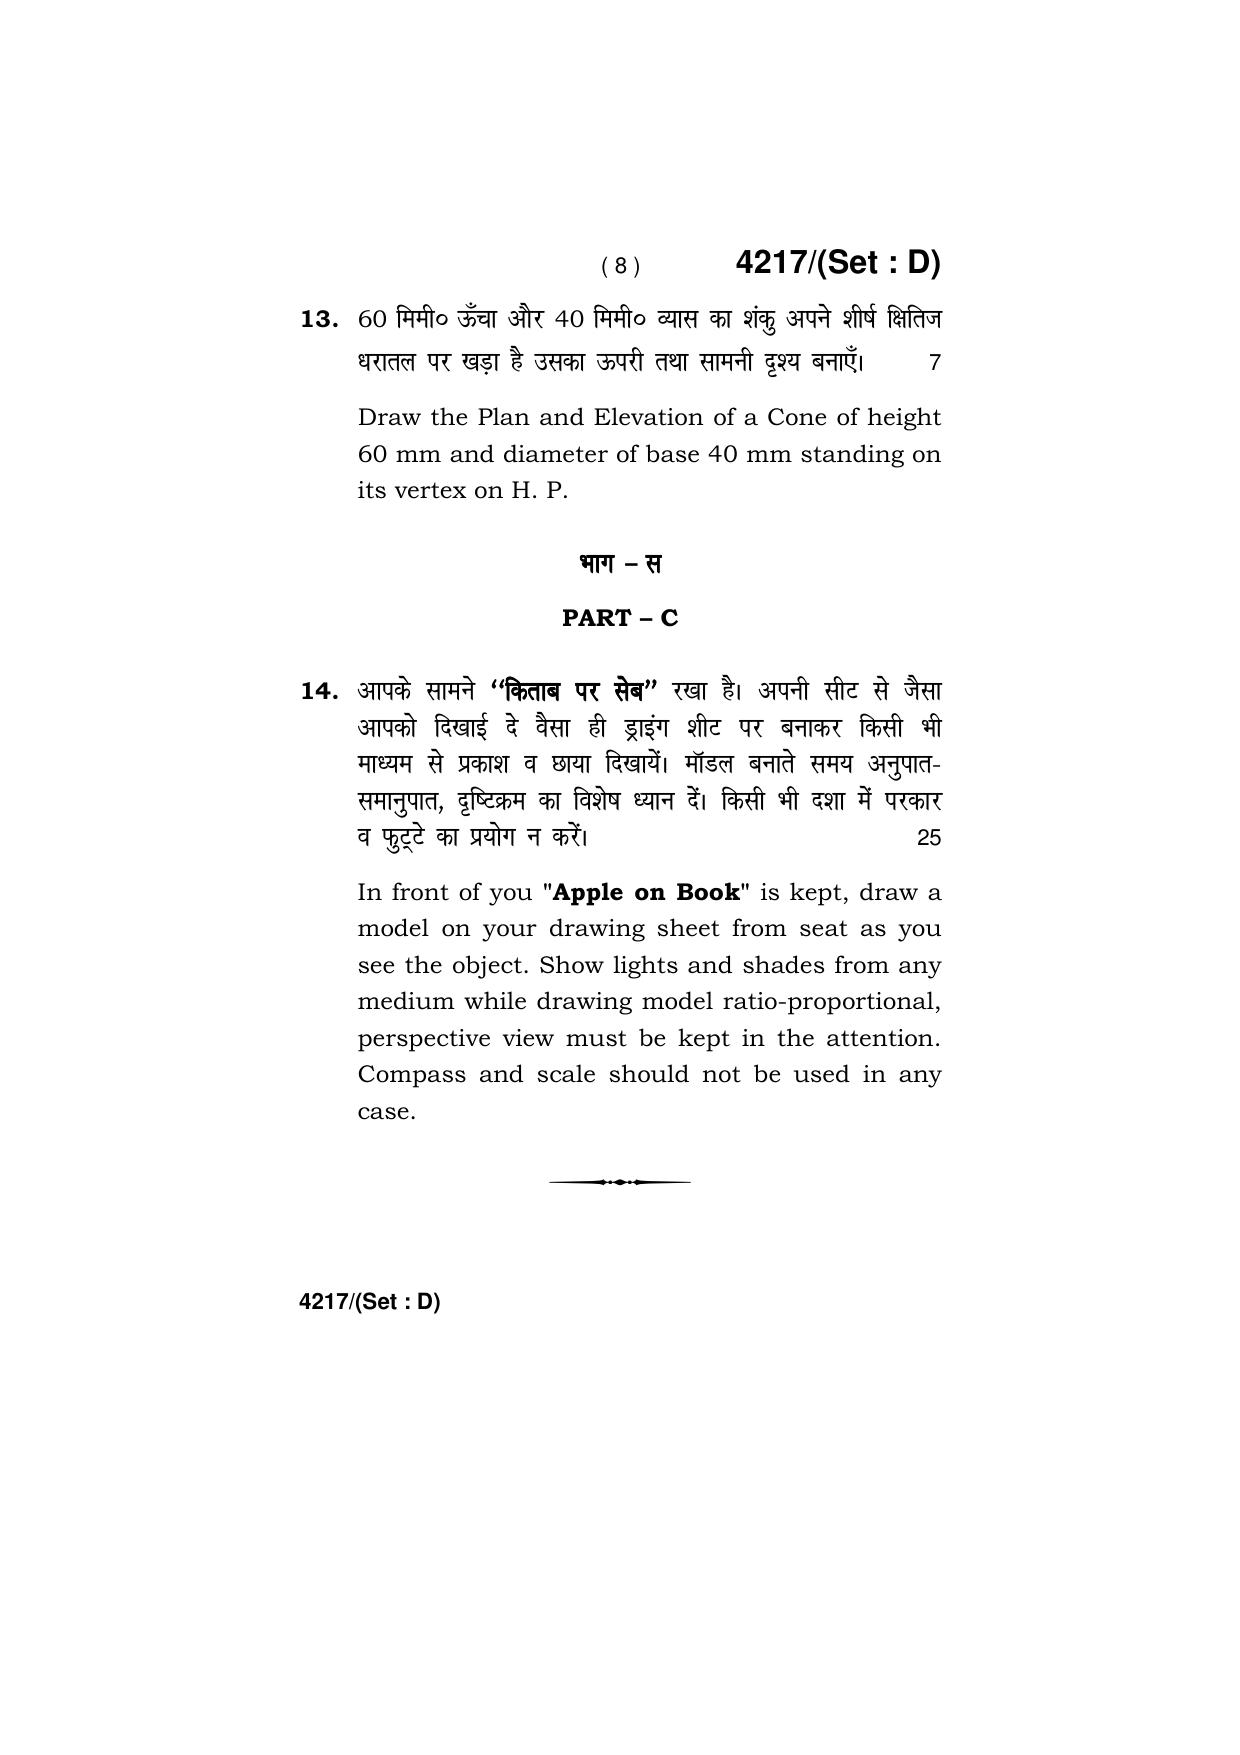 Haryana Board HBSE Class 10 Drawing (All Set) 2019 Question Paper - Page 32